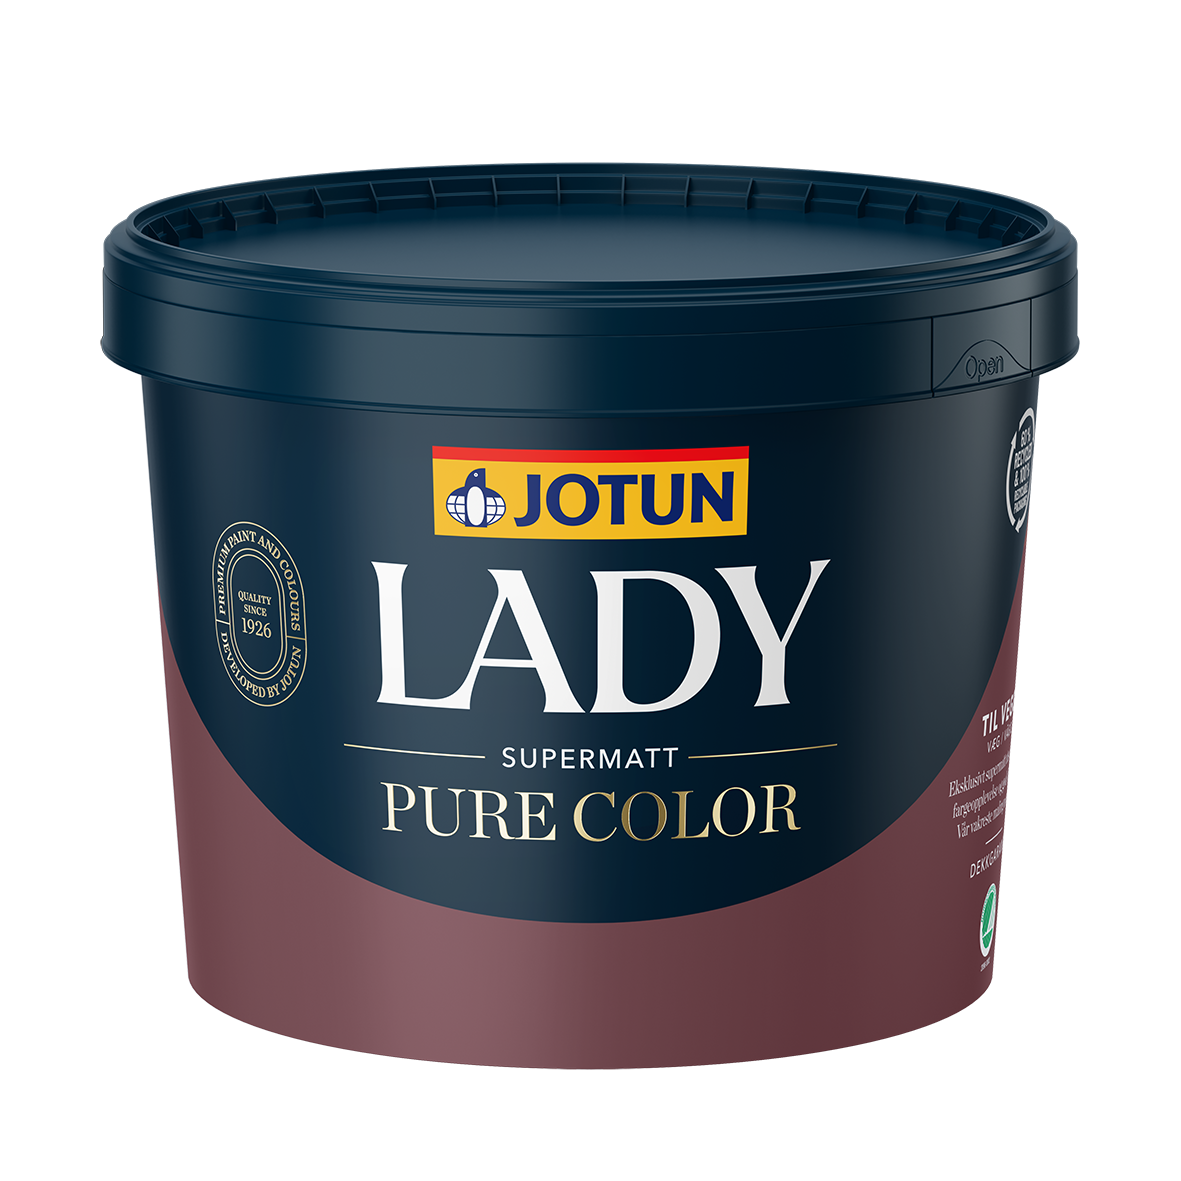 ladypurecolor